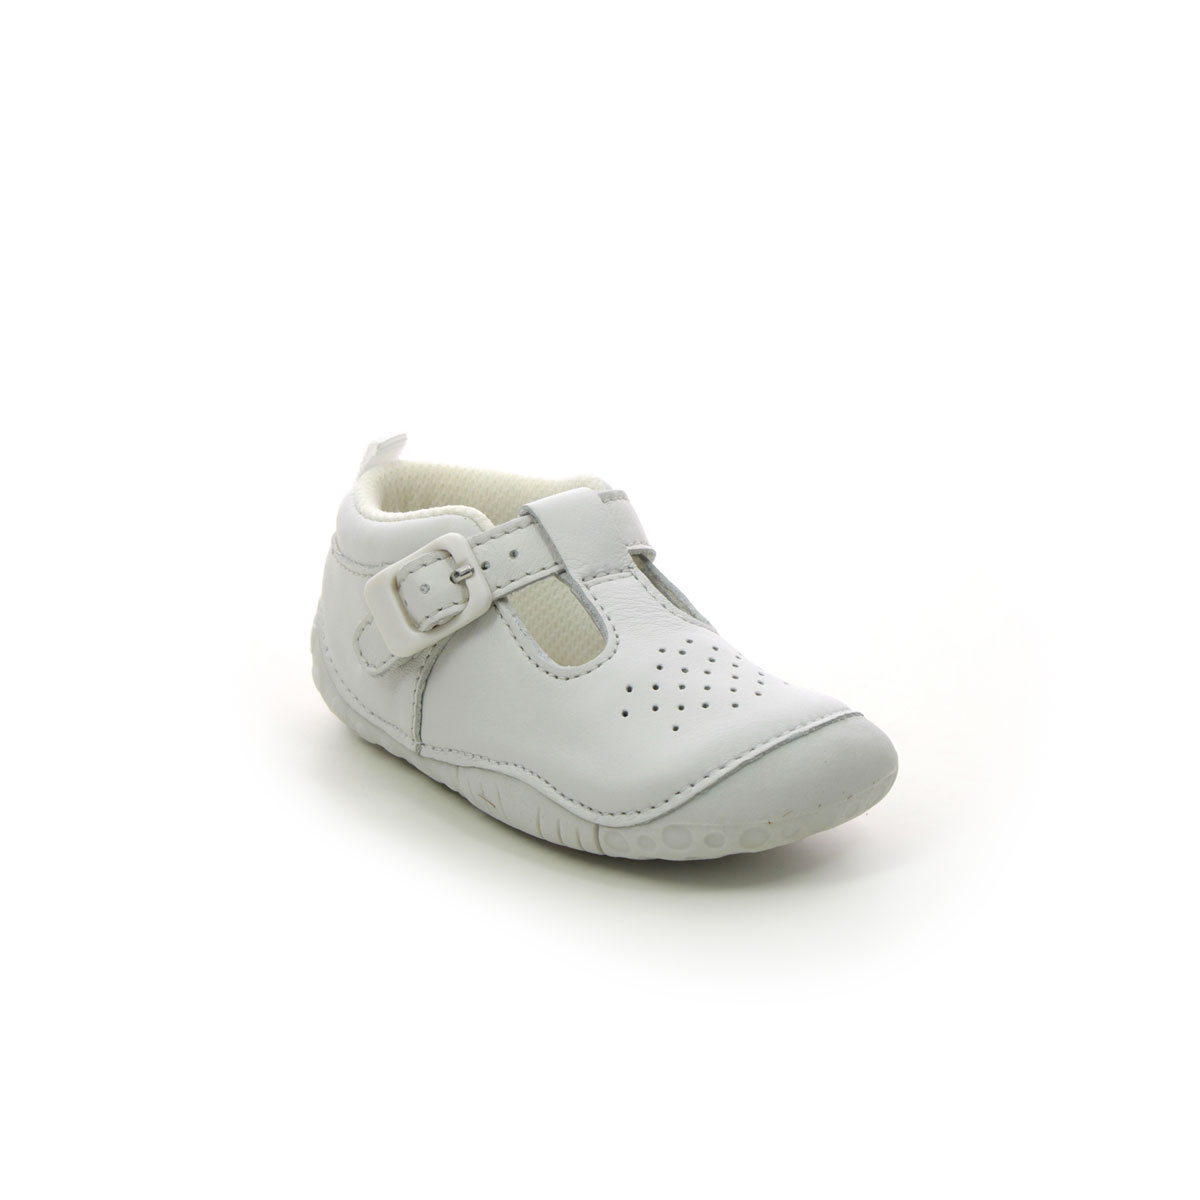 Start Rite - Baby Jack In White Leather 0746-76F In Size 5 In Plain White Leather Boys First And Toddler Shoes  In White Leather For kids